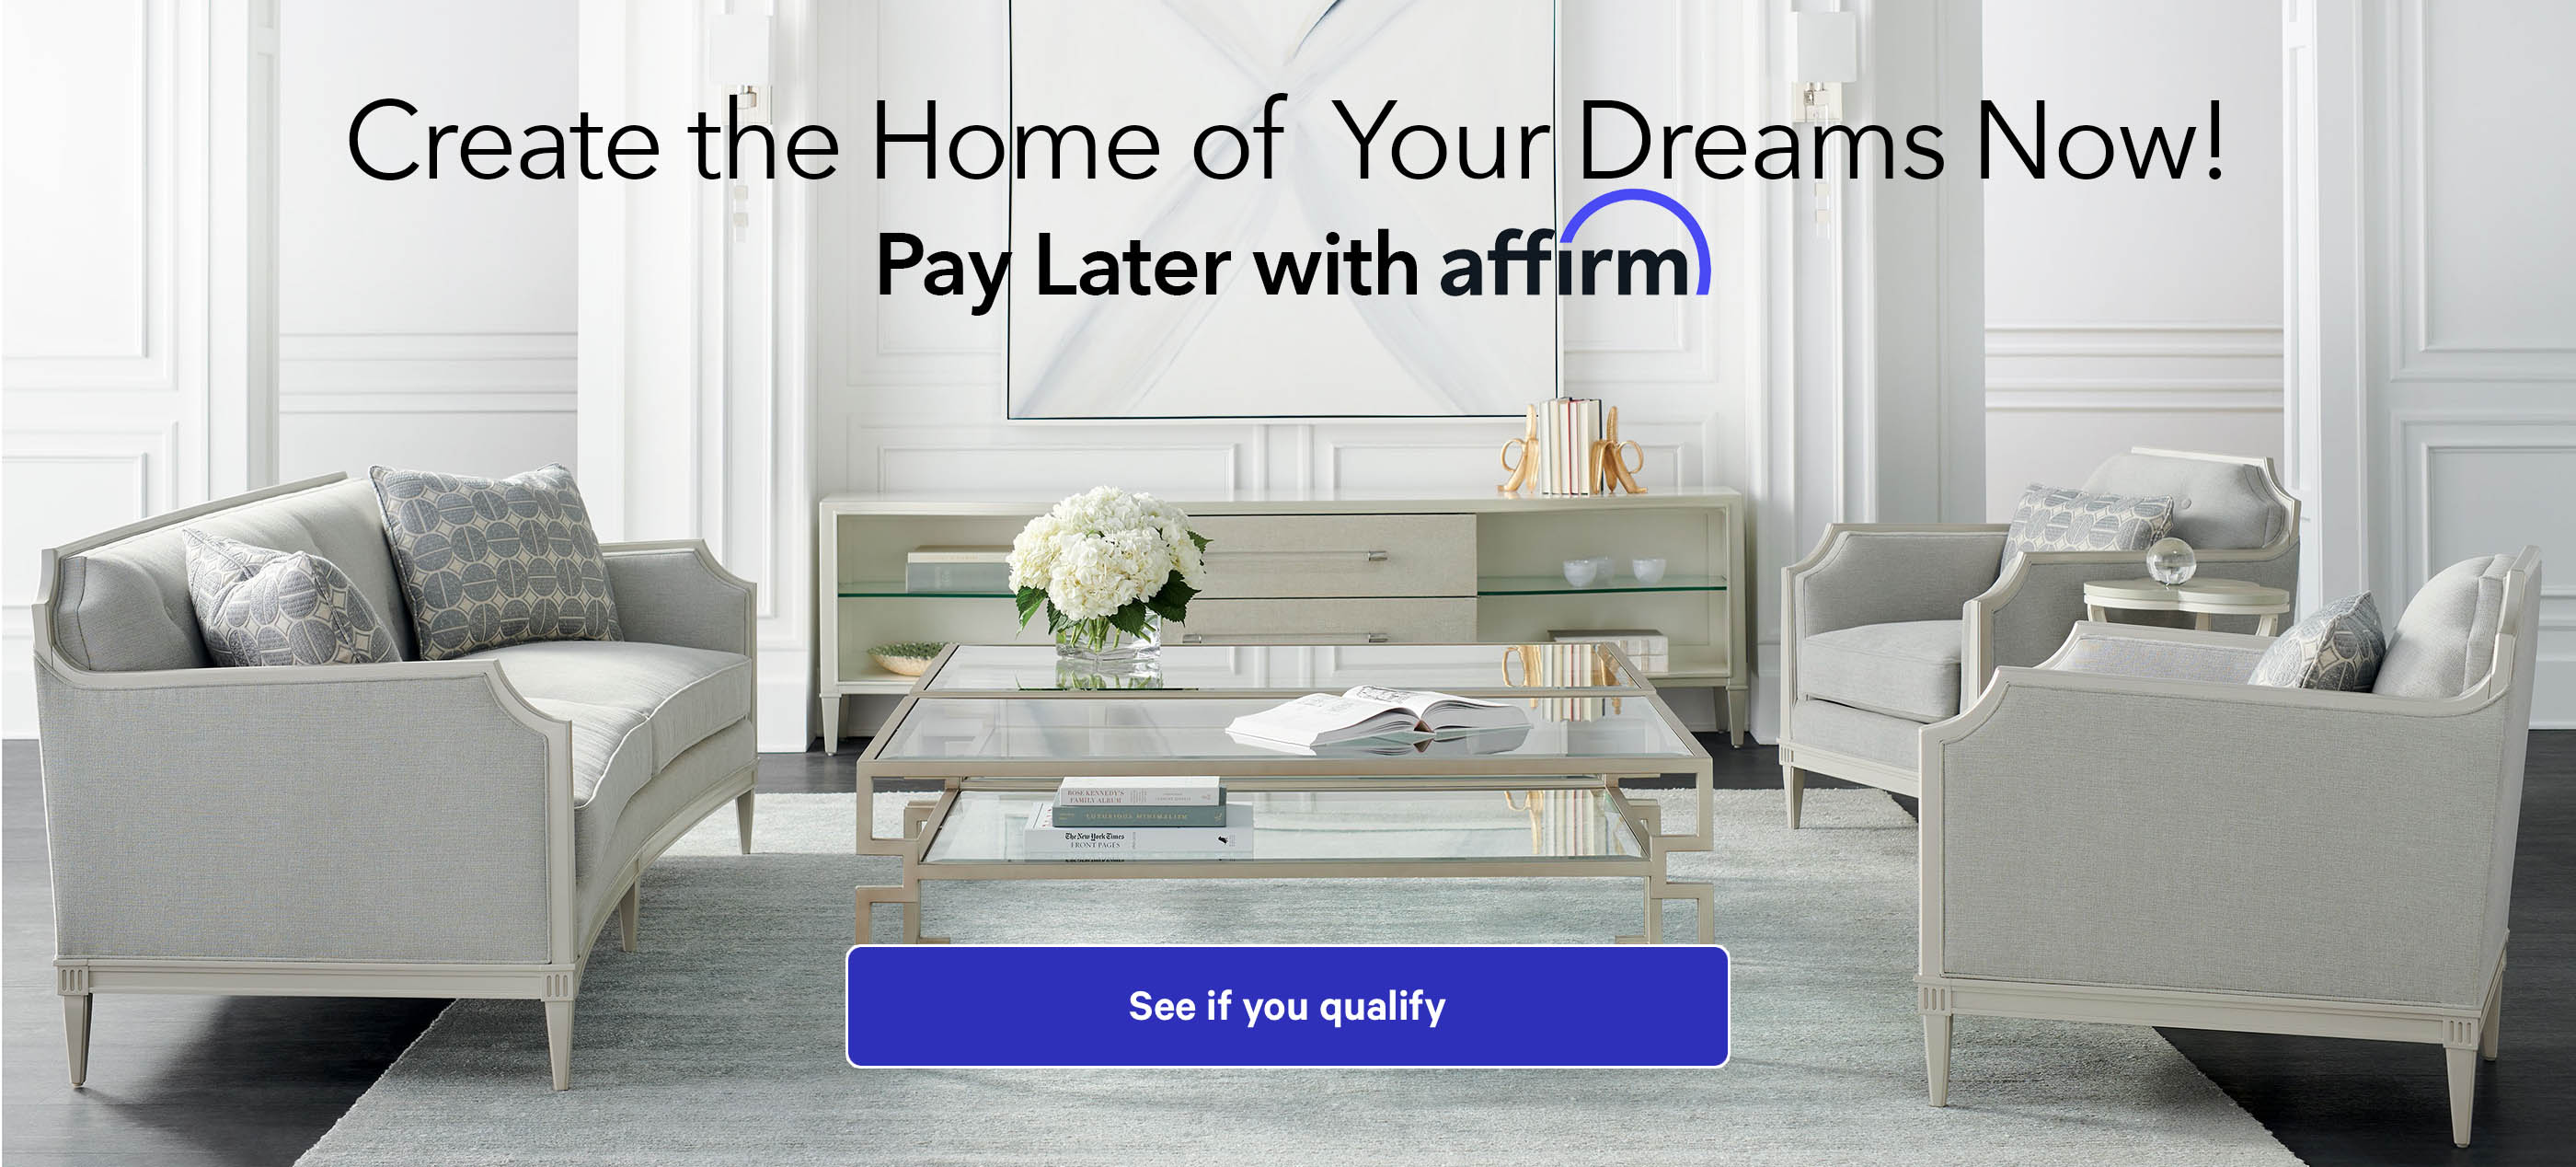 Homethreads - Pay Later with Affirm